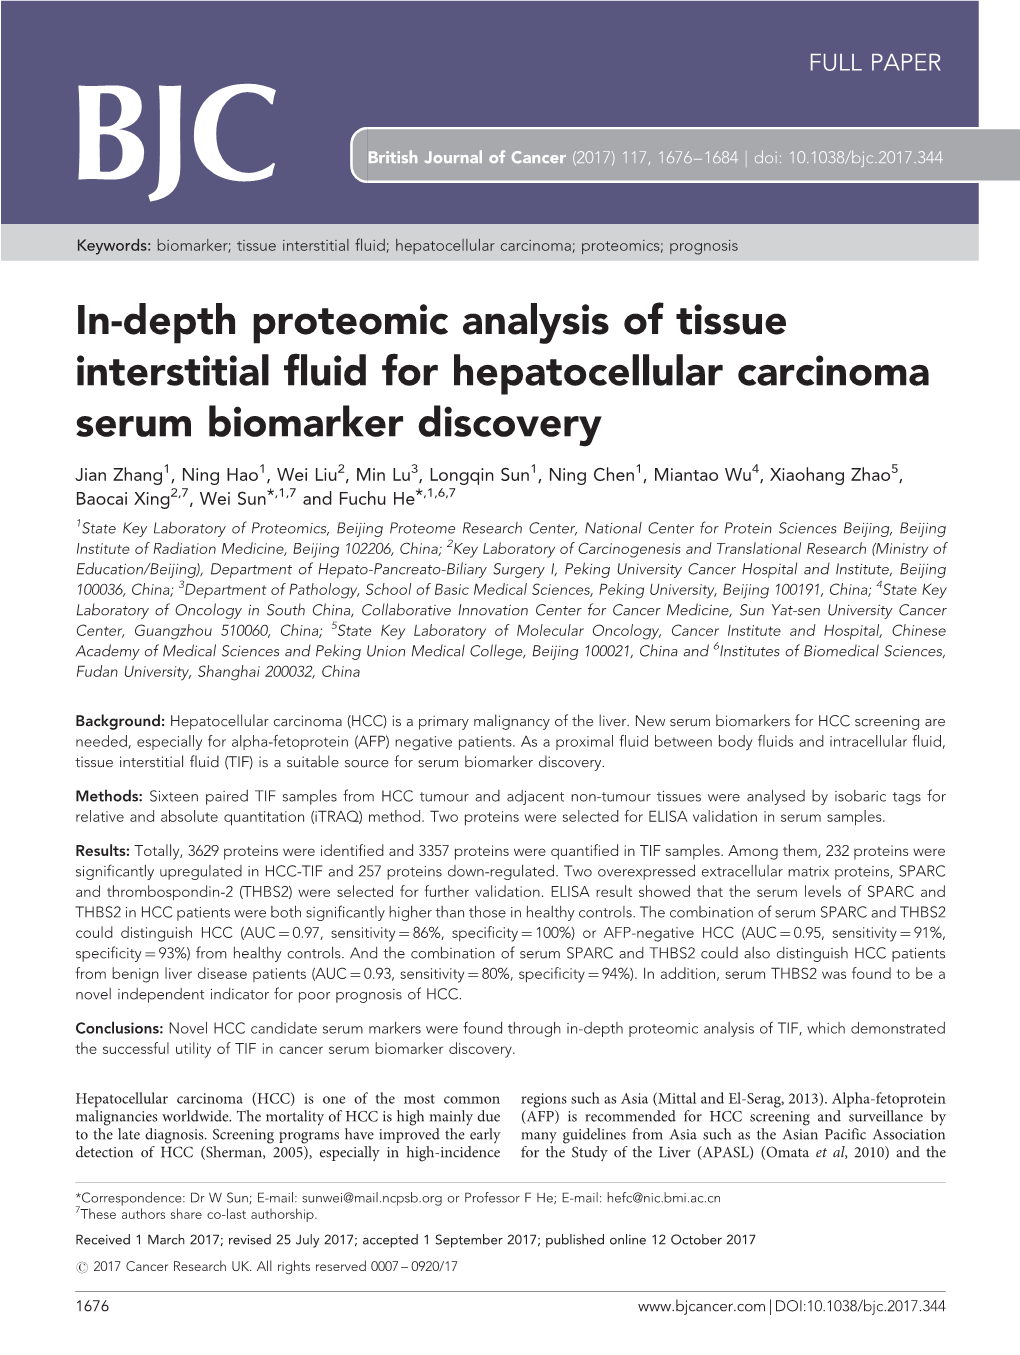 In-Depth Proteomic Analysis of Tissue Interstitial Fluid for Hepatocellular Carcinoma Serum Biomarker Discovery